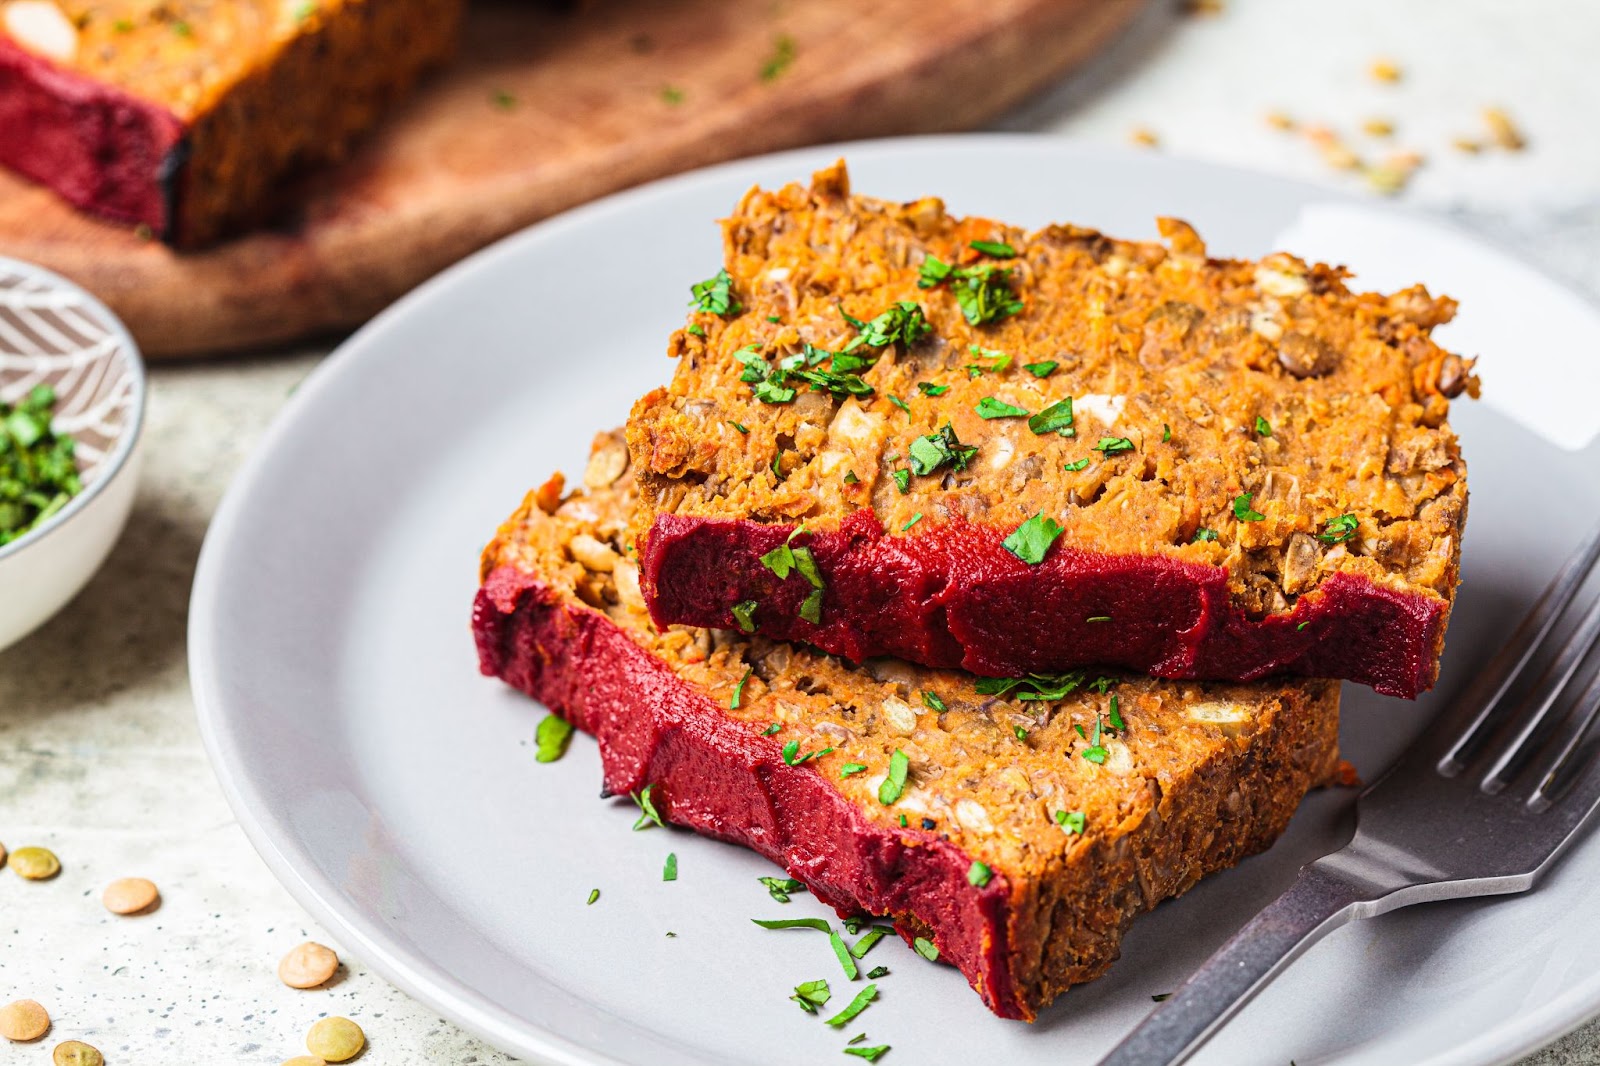 Vegan meatloaf made with chickpeas and flaxseed